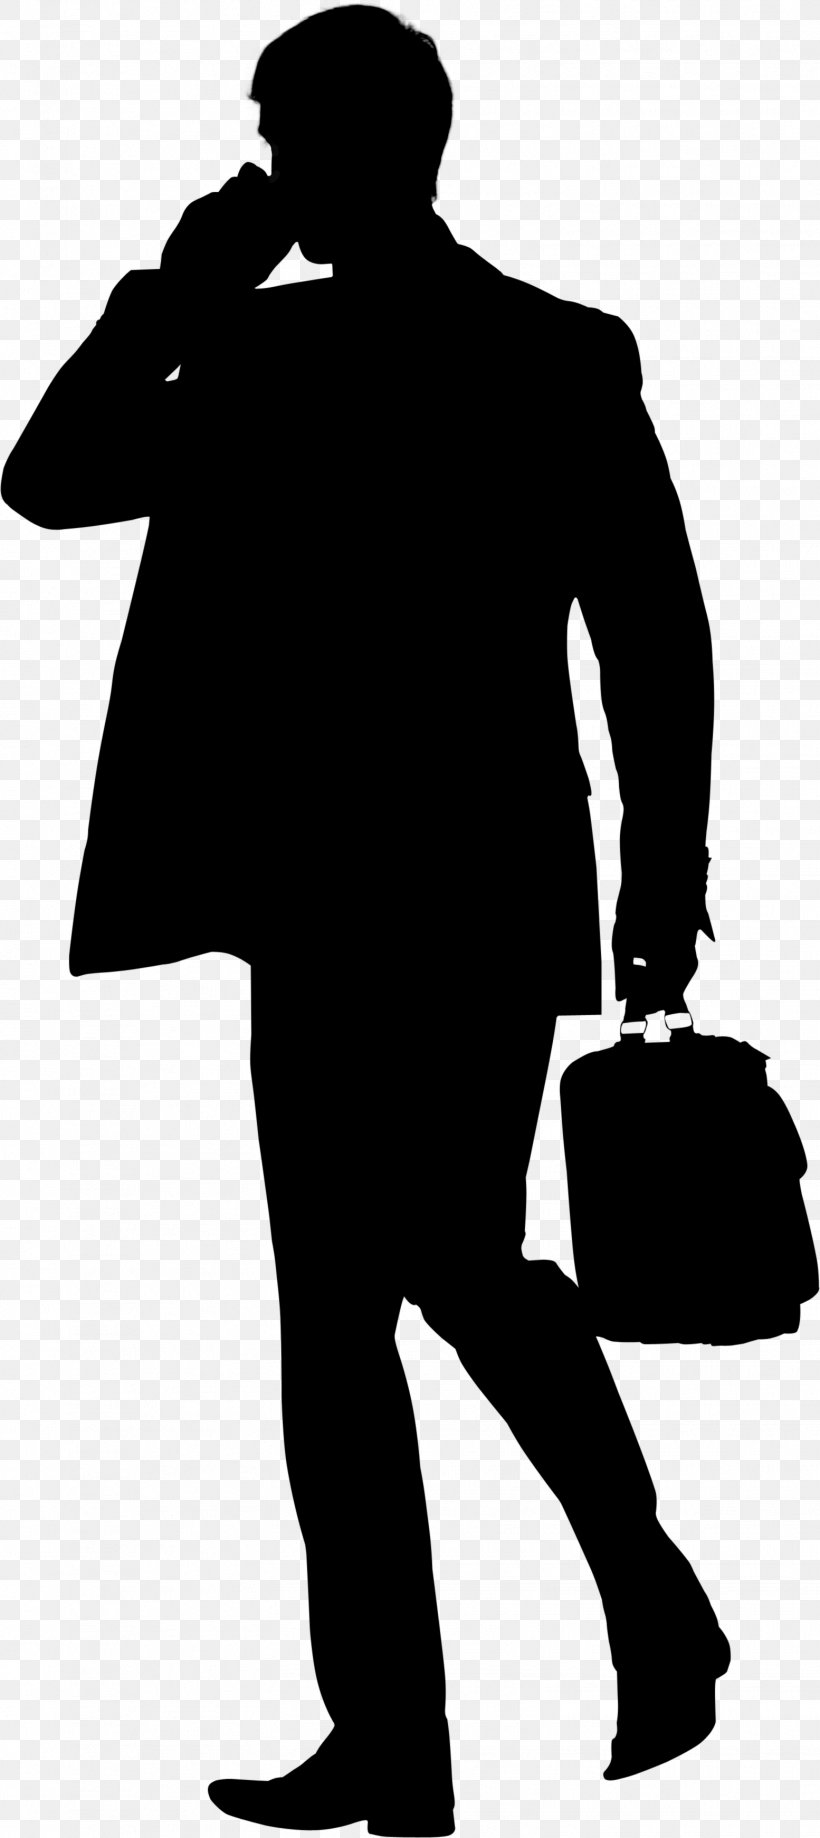 Silhouette Illustration Image Photography, PNG, 1554x3484px, Silhouette, Bag, Black, Blackandwhite, Outerwear Download Free